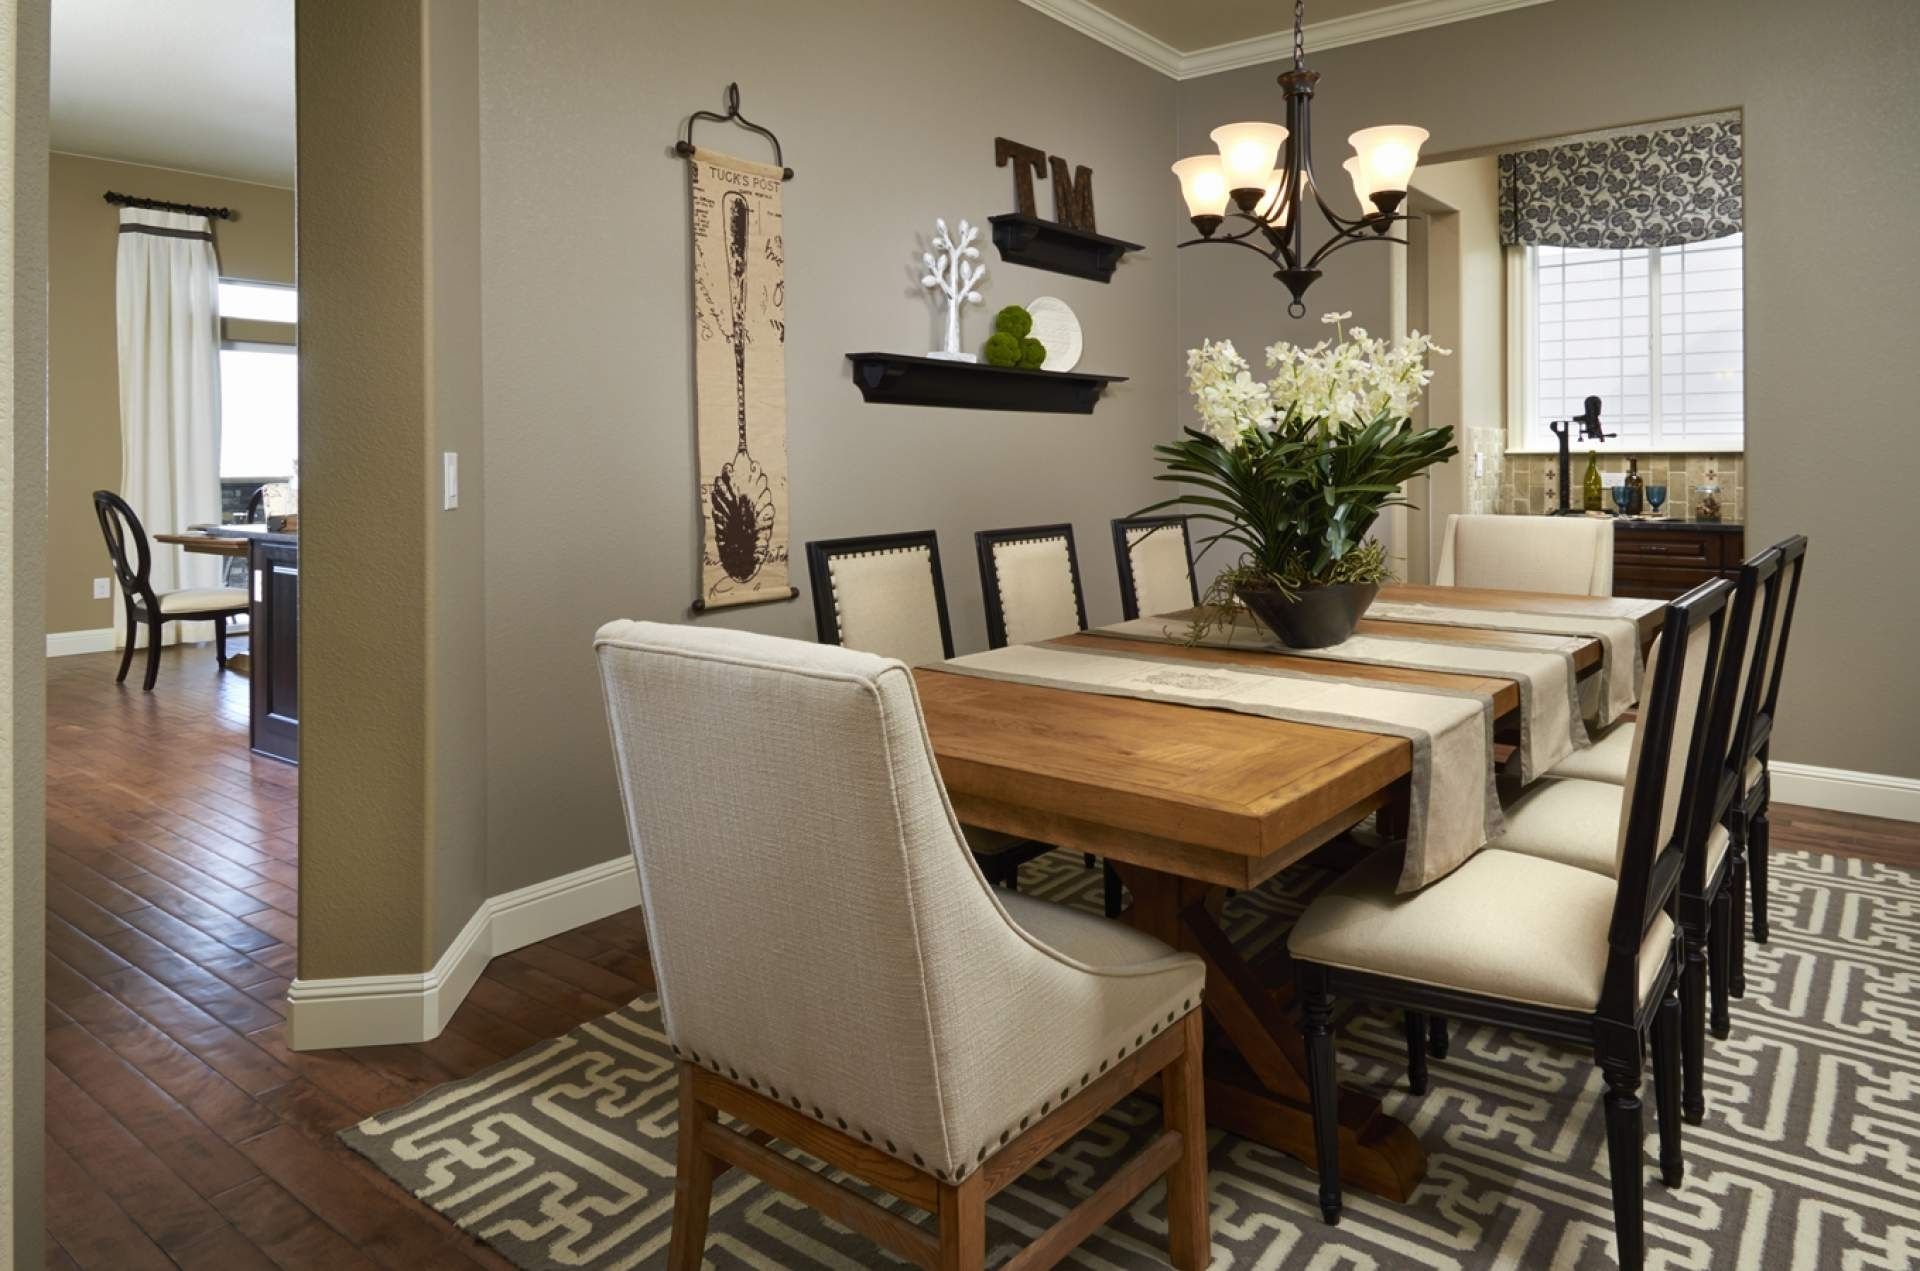 Rustic Wall Decor For Dining Room